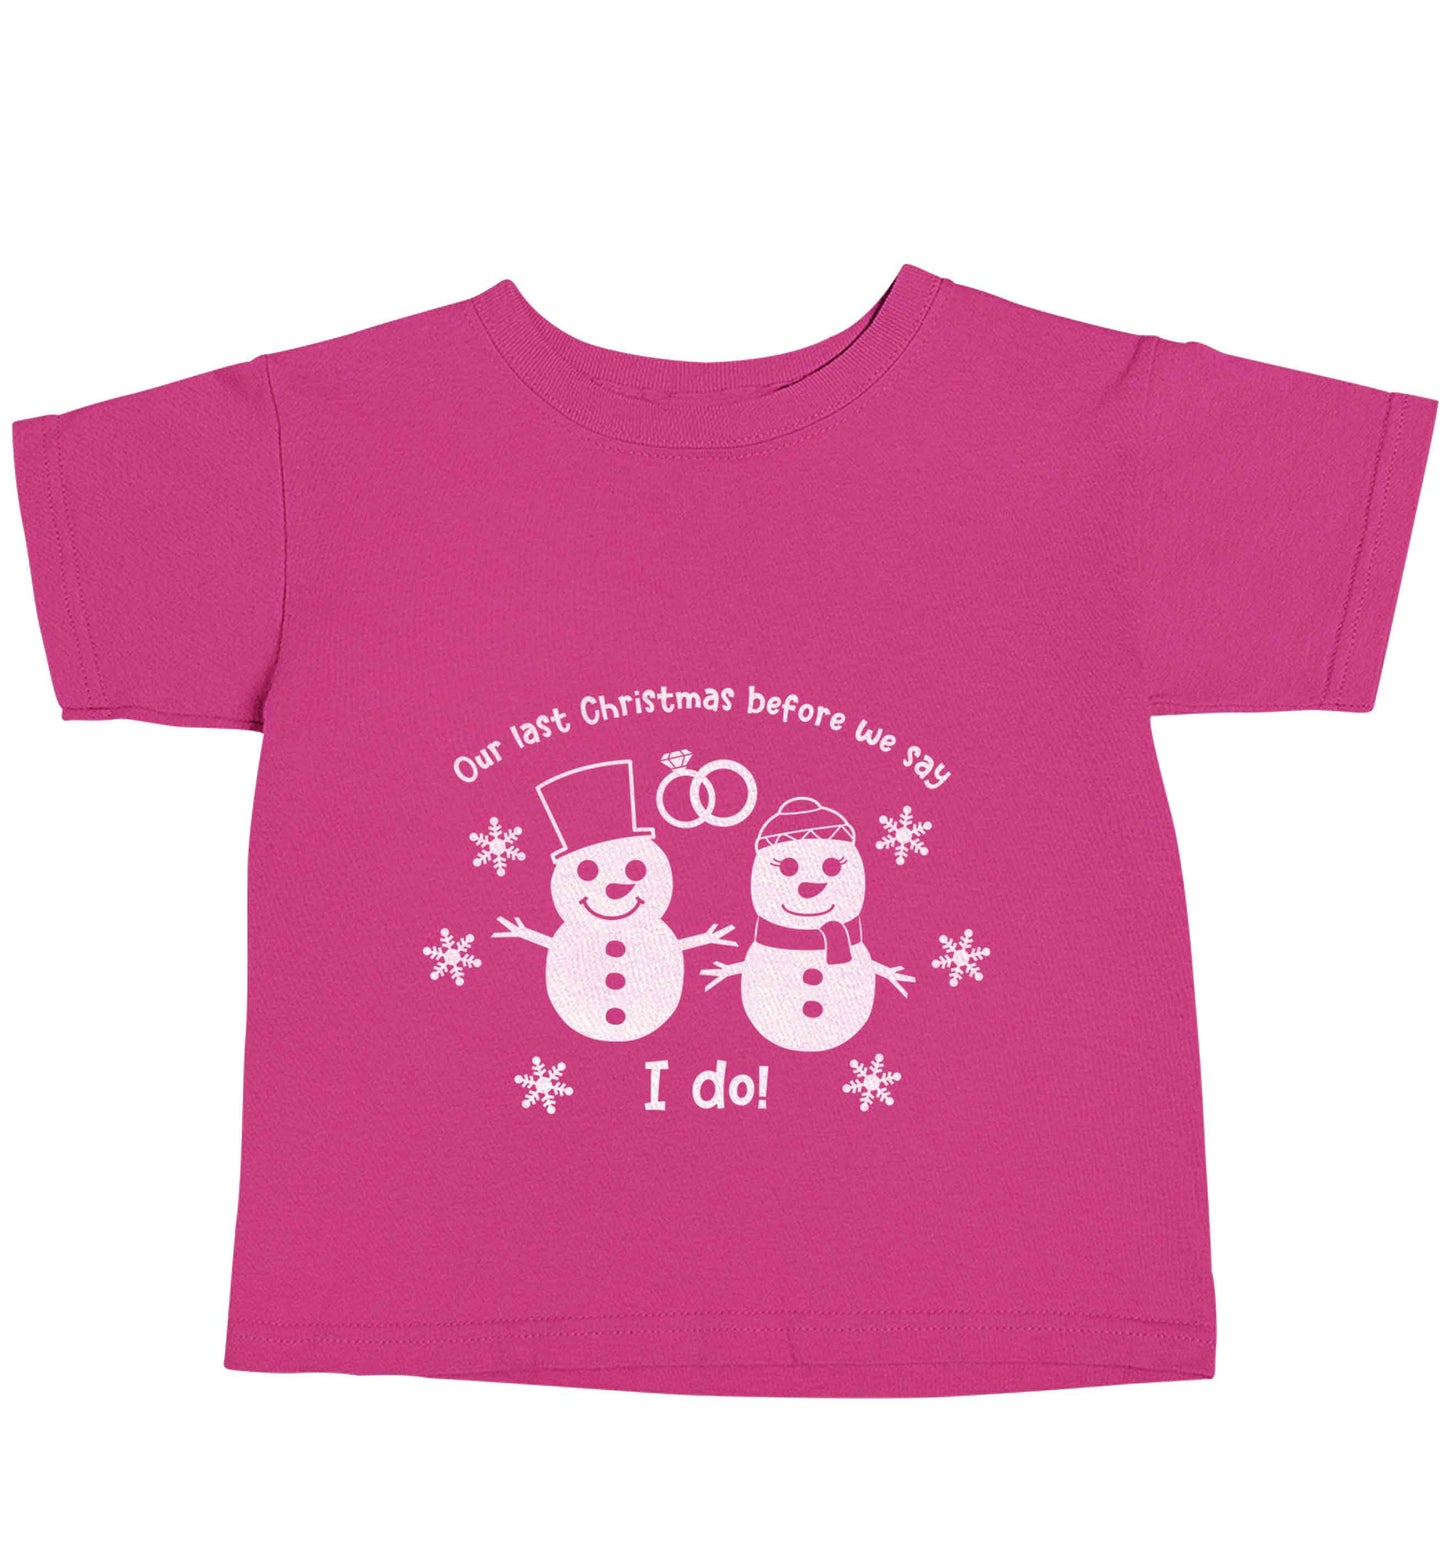 Last Christmas before we say I do pink baby toddler Tshirt 2 Years